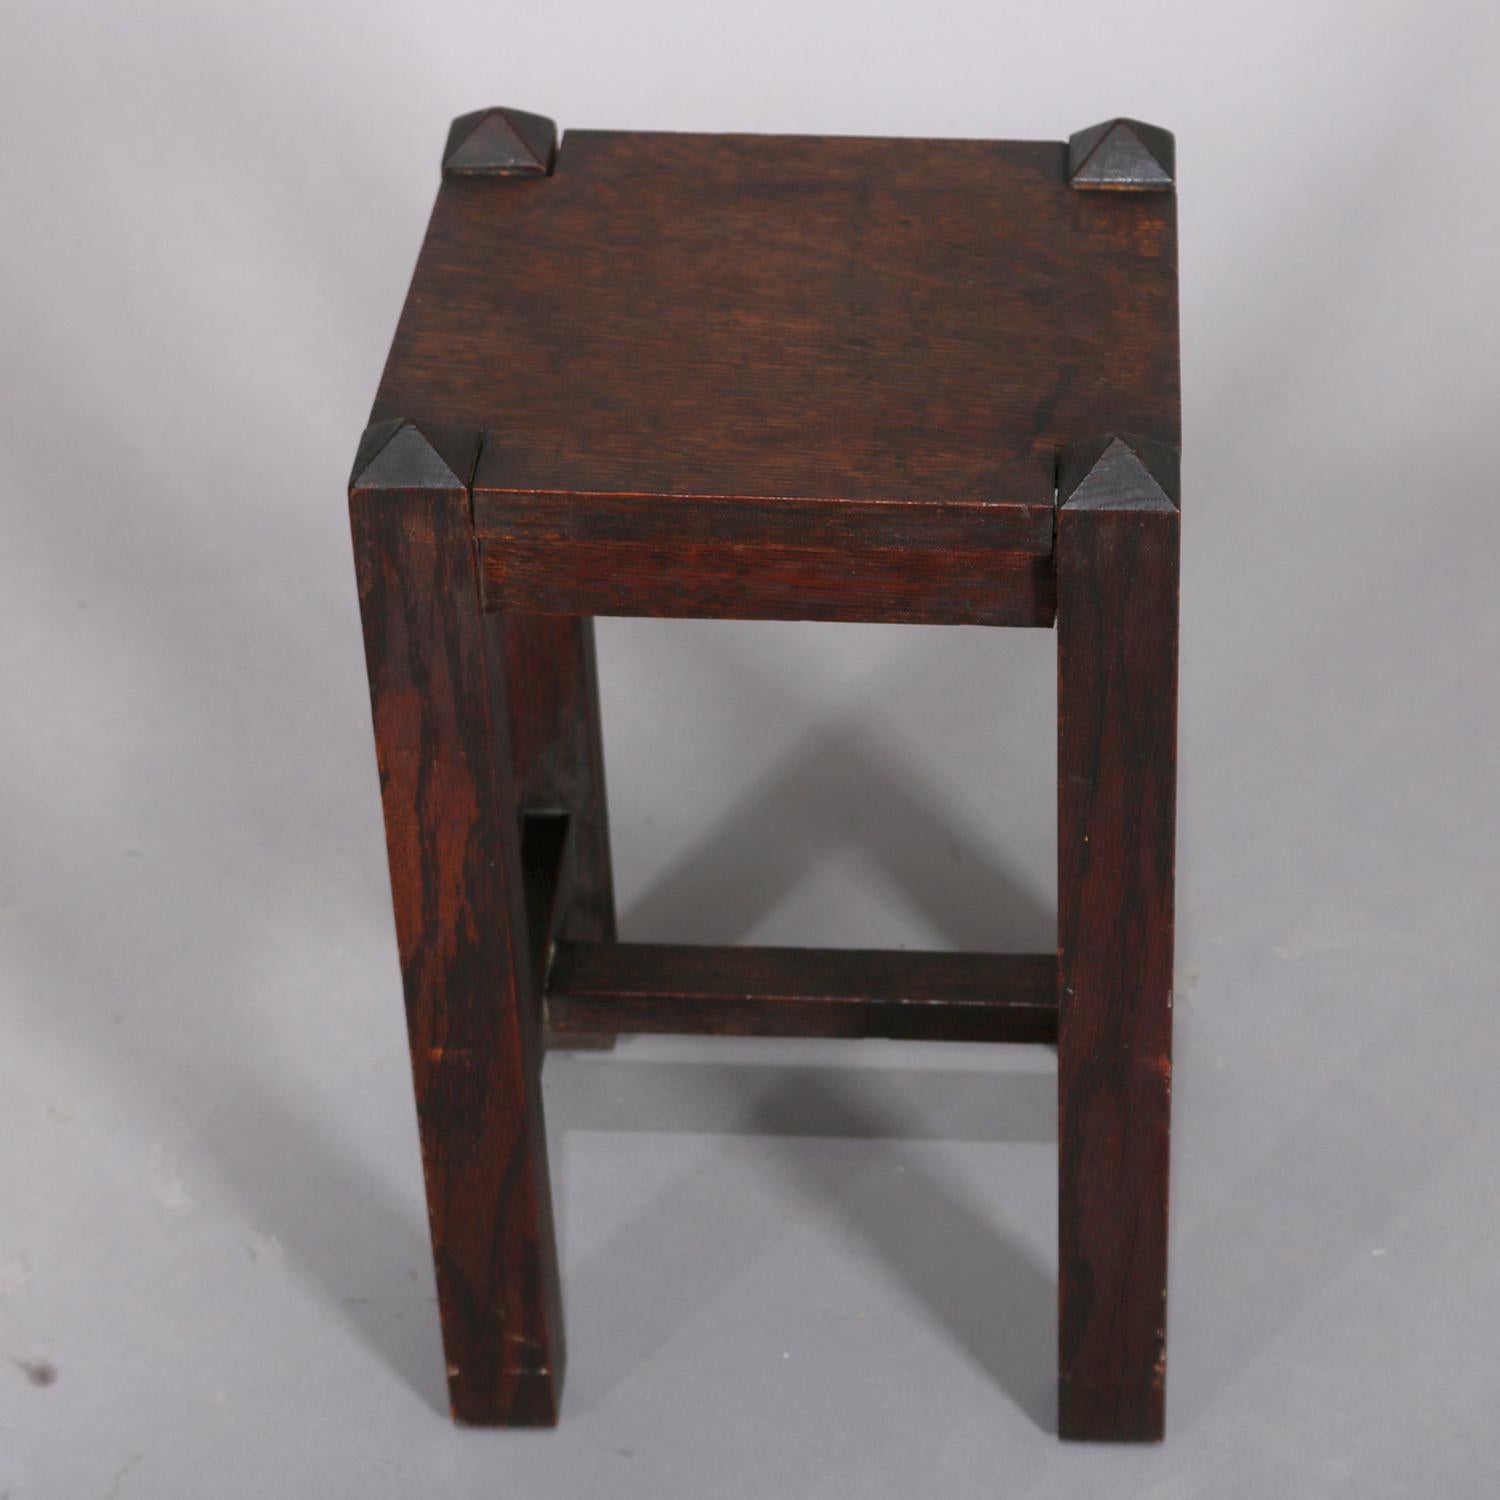 Antique Arts & Crafts Stickley School mission oak plant stand features traditional form-follows-function design with upper table raised on pyramidal square legs and joined by H-stretcher, circa 1910.

Measures: 18.5